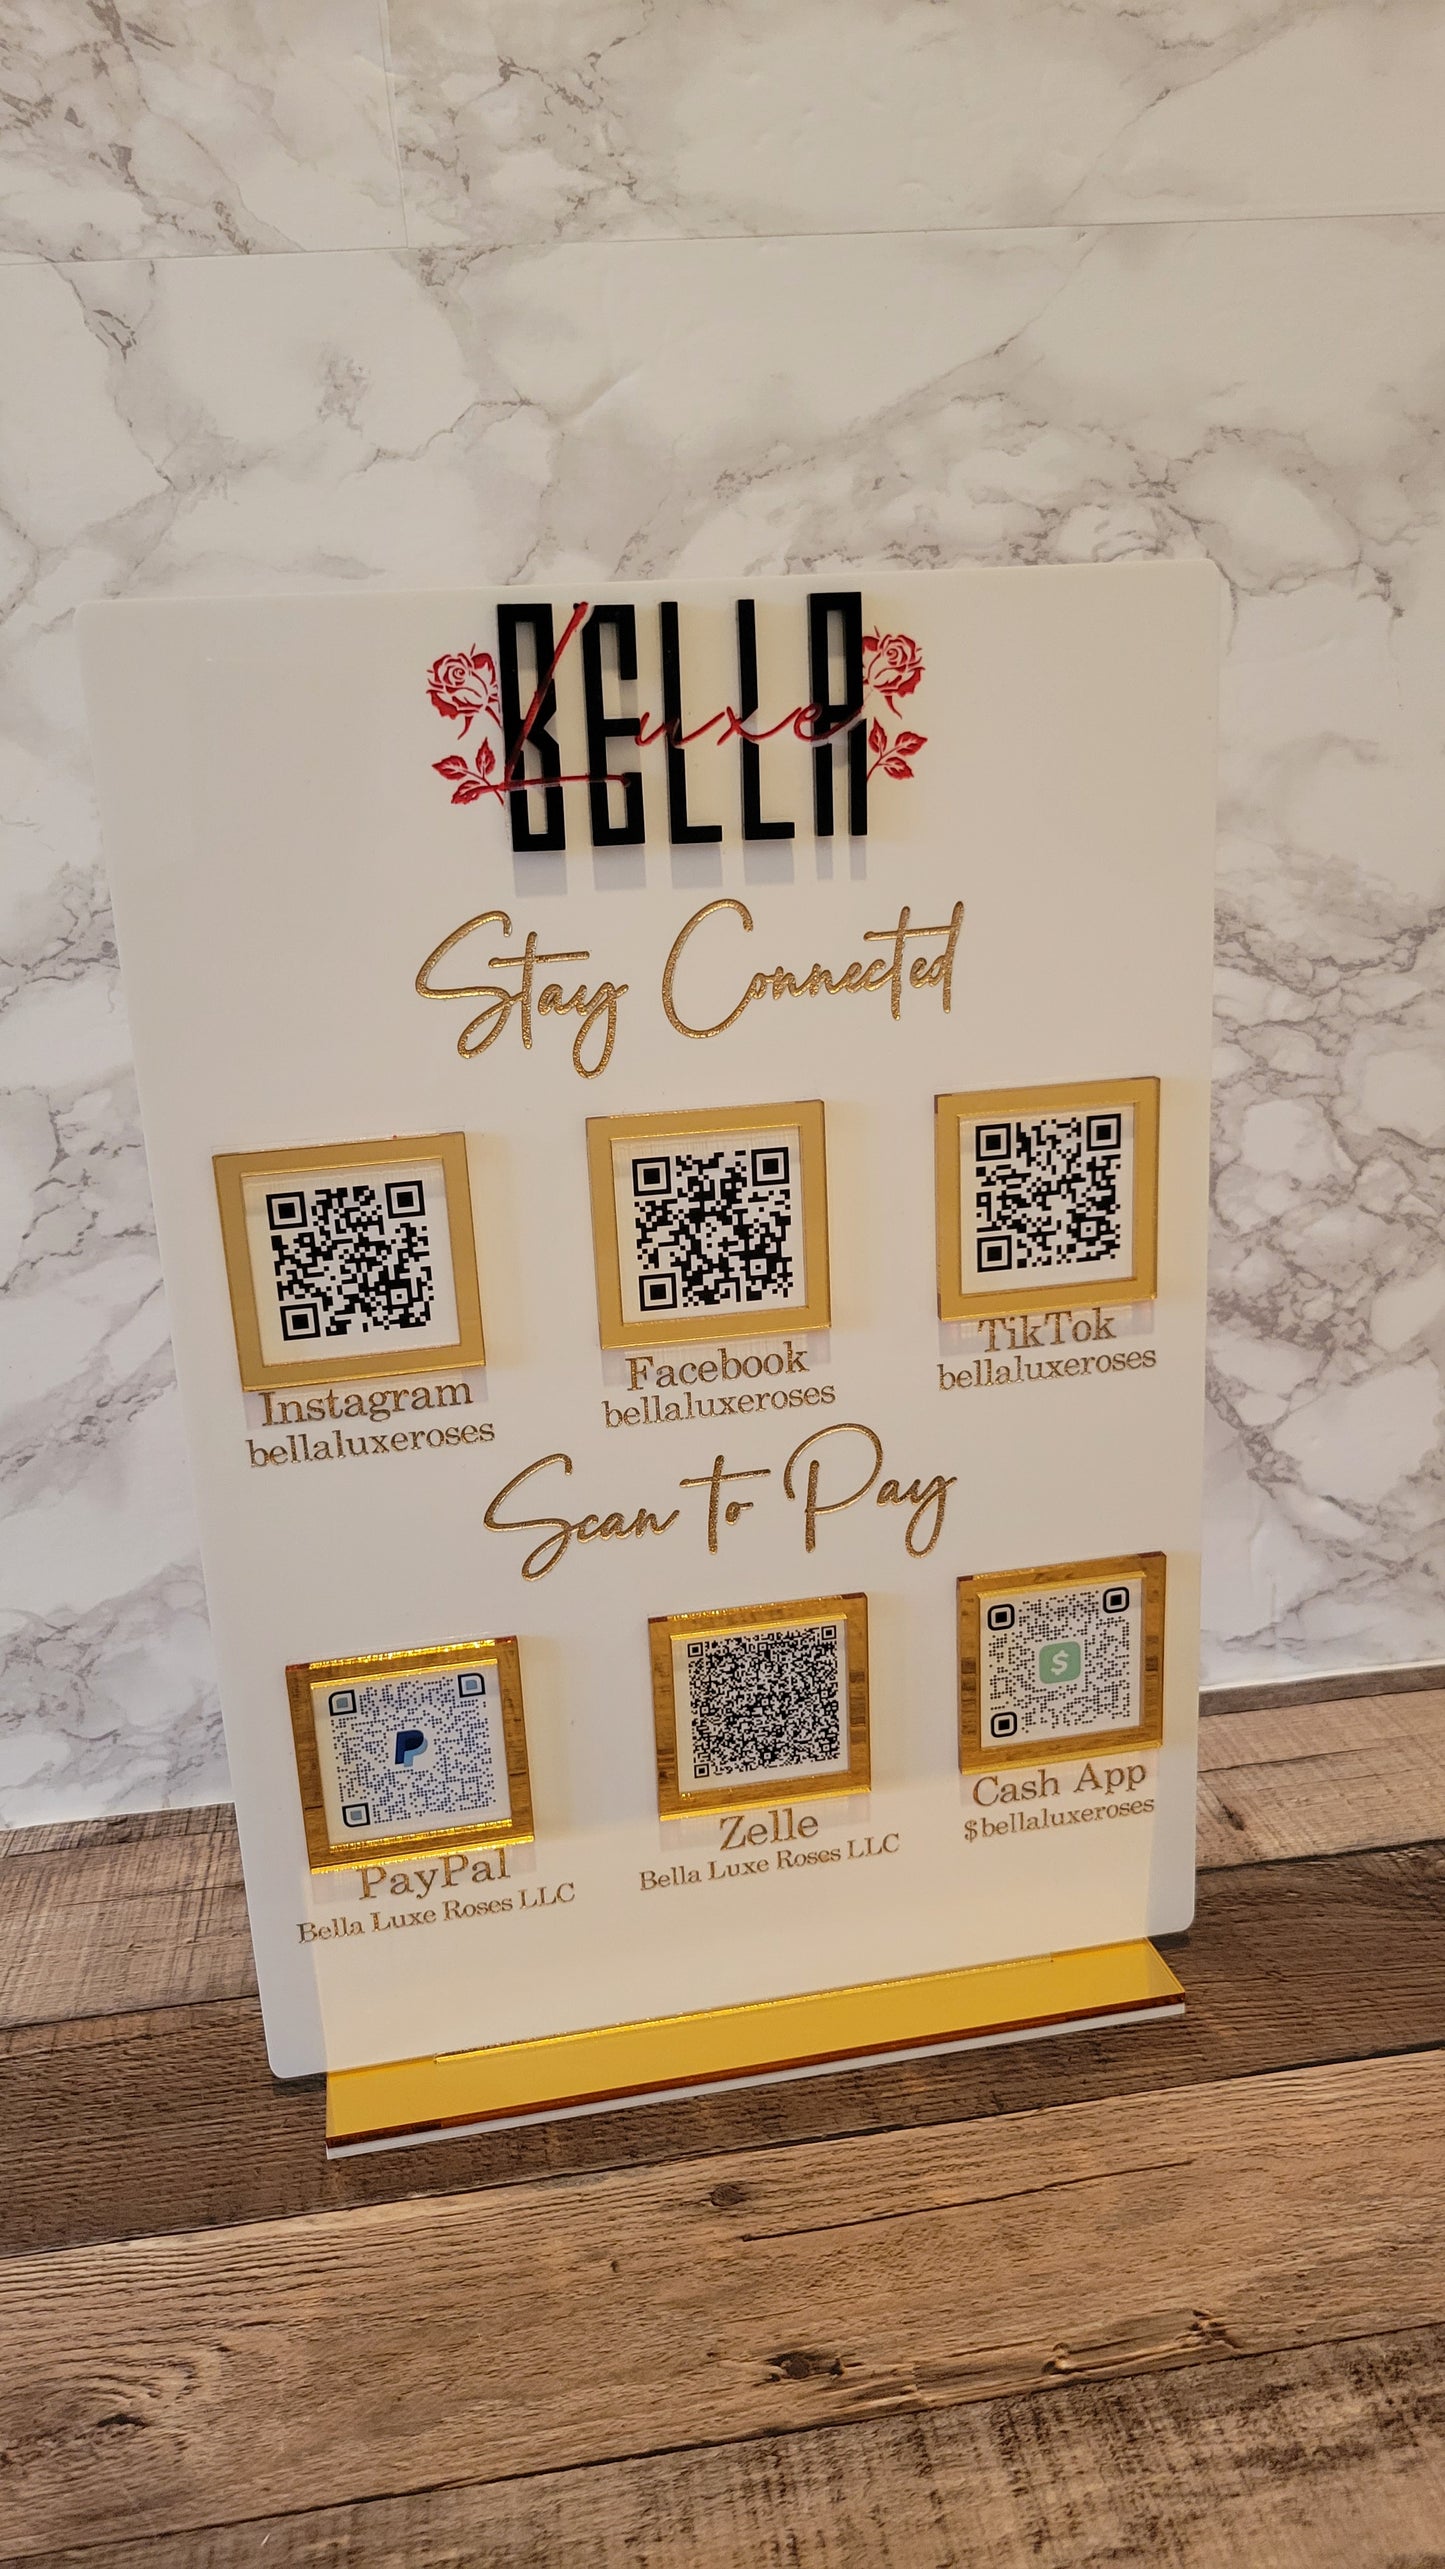 Stay Connected and Scan to Pay Sign